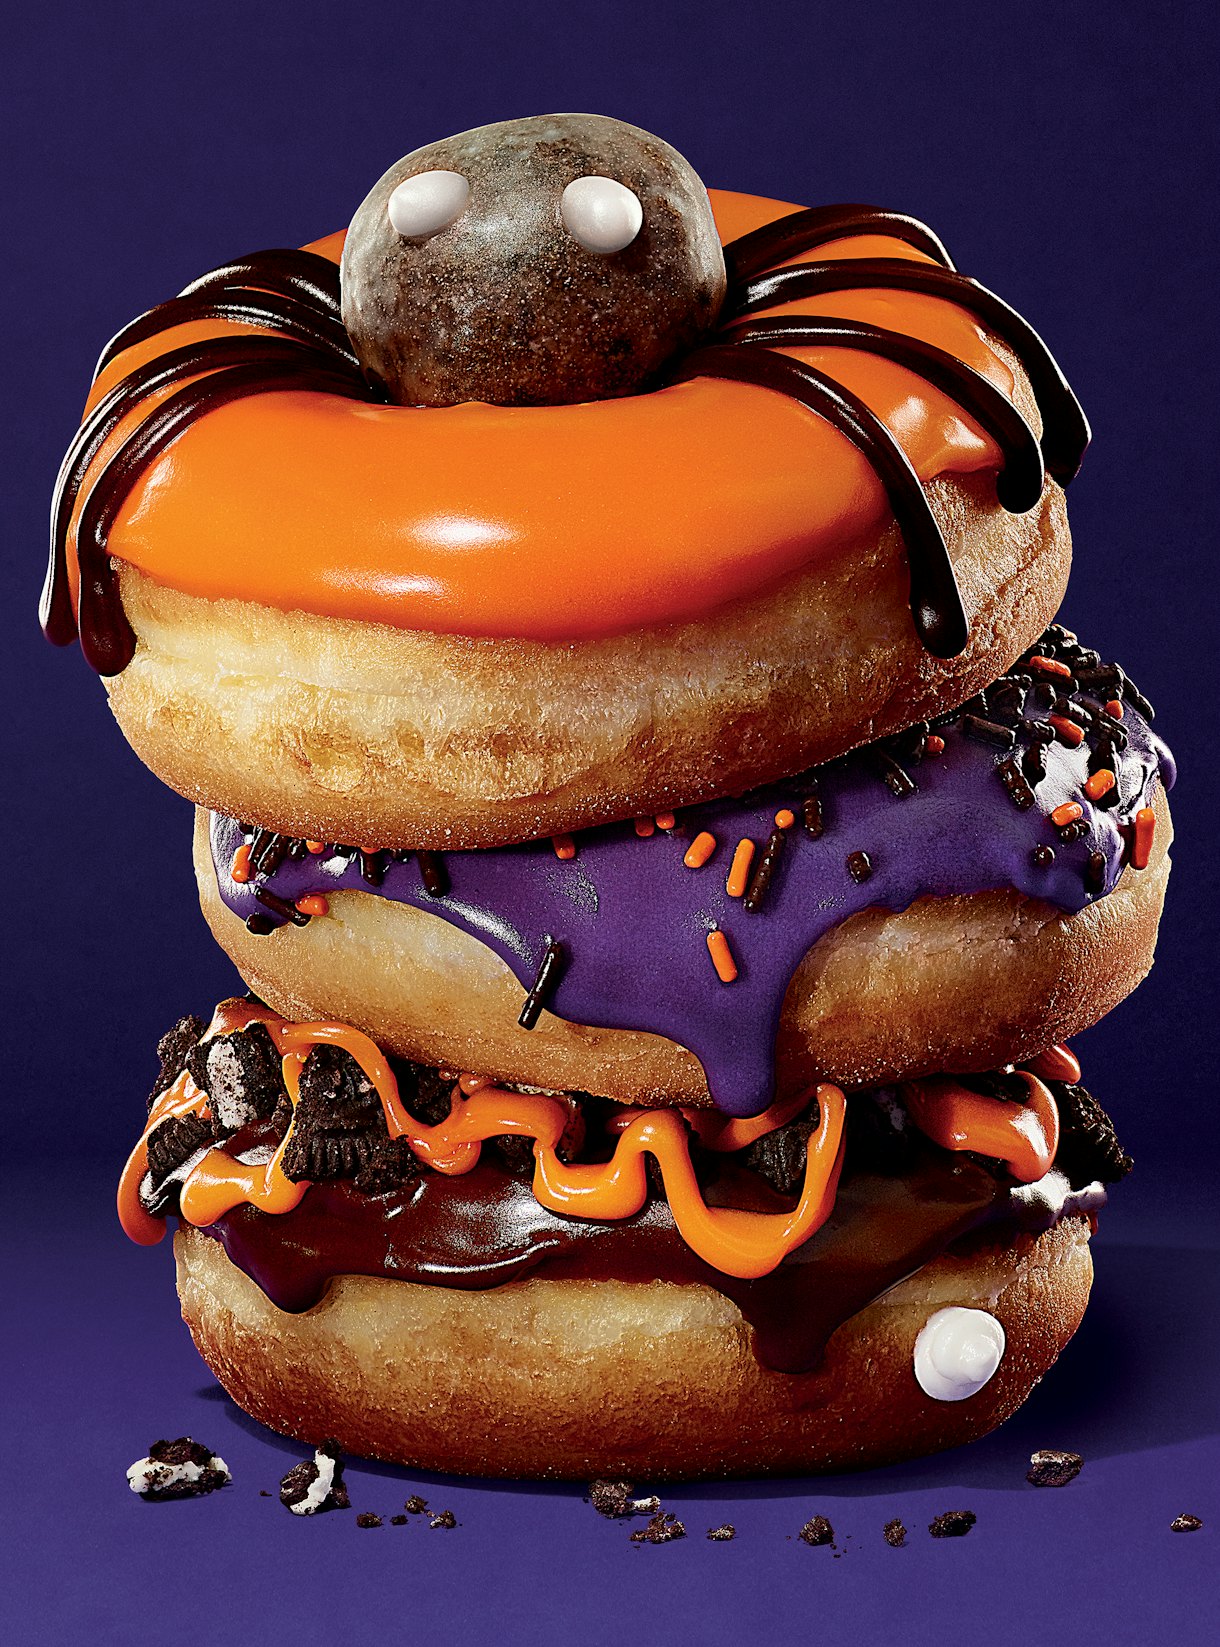 Dunkin' Donuts' Halloween Oreo Donut Is A Spooky New Treat That You'll